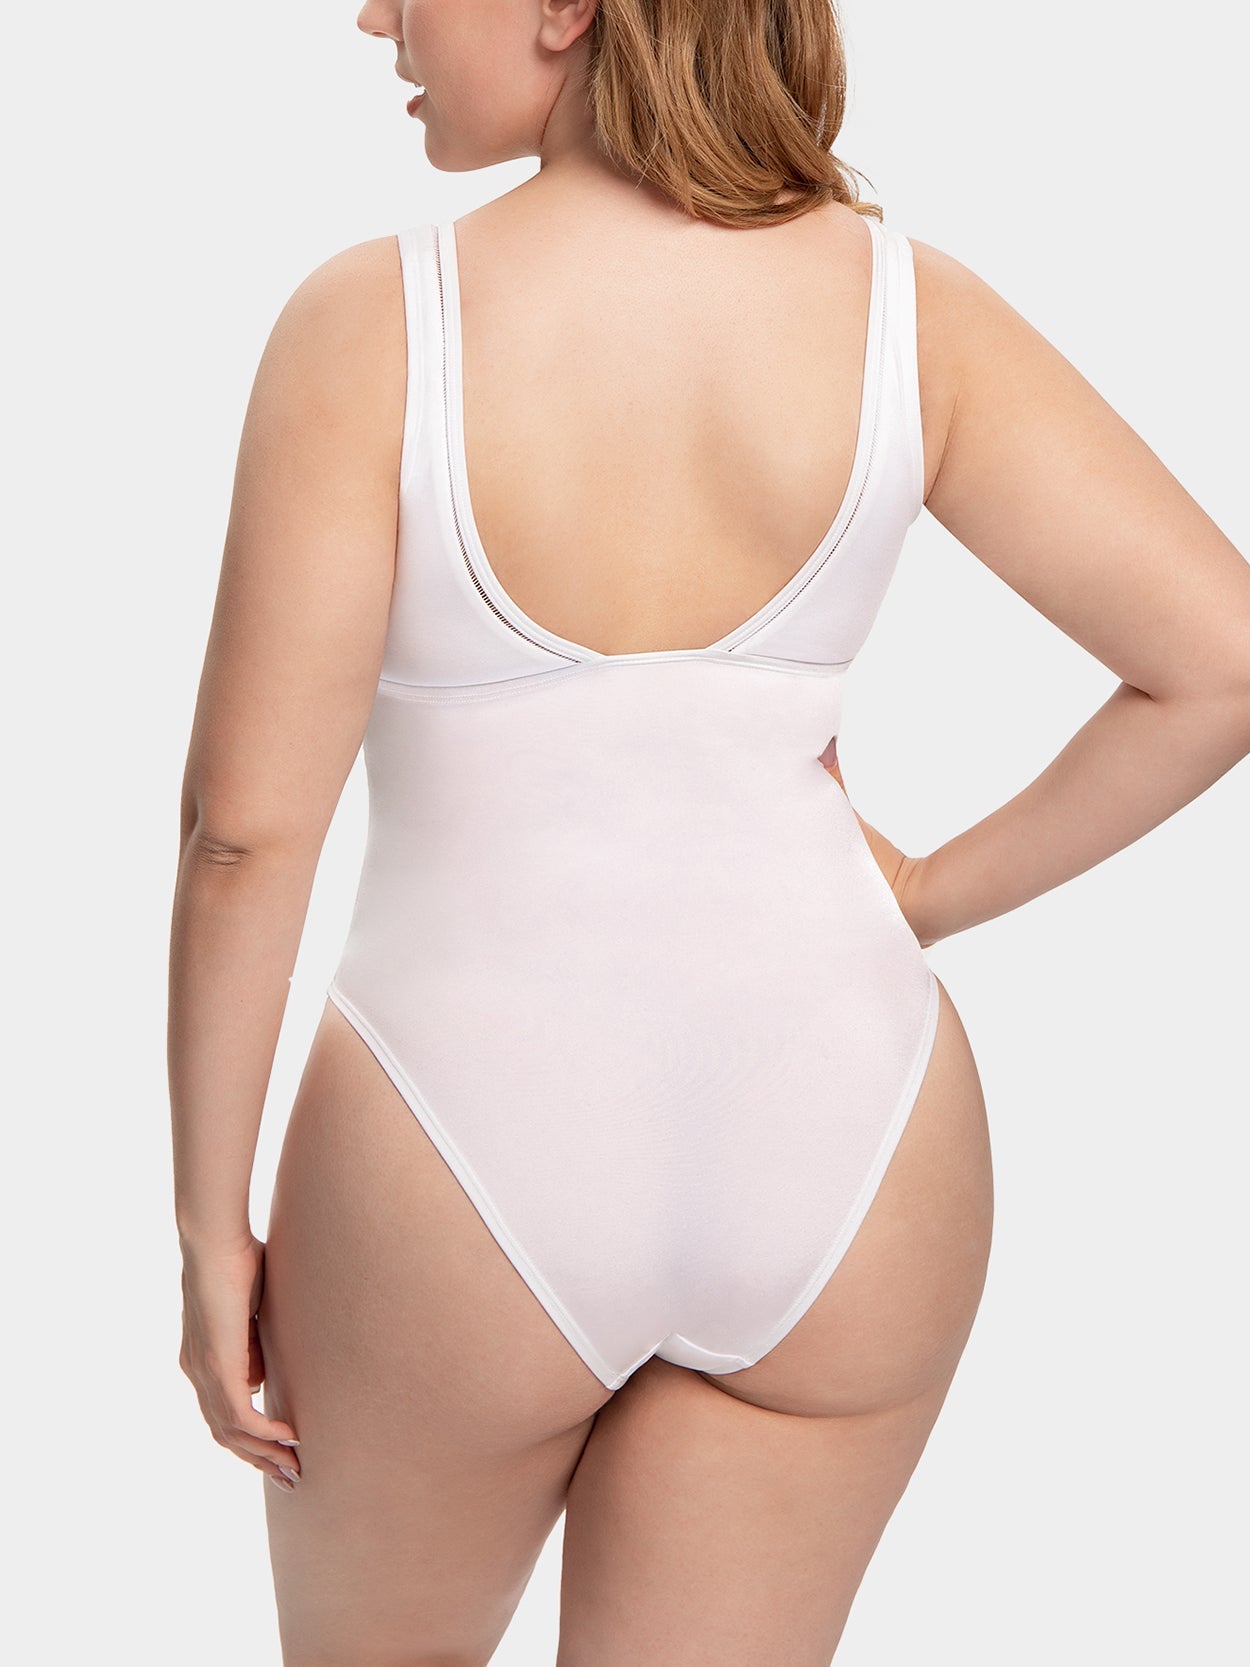 Womens One-piece Swimsuits in Womens One-Piece Swimsuits 